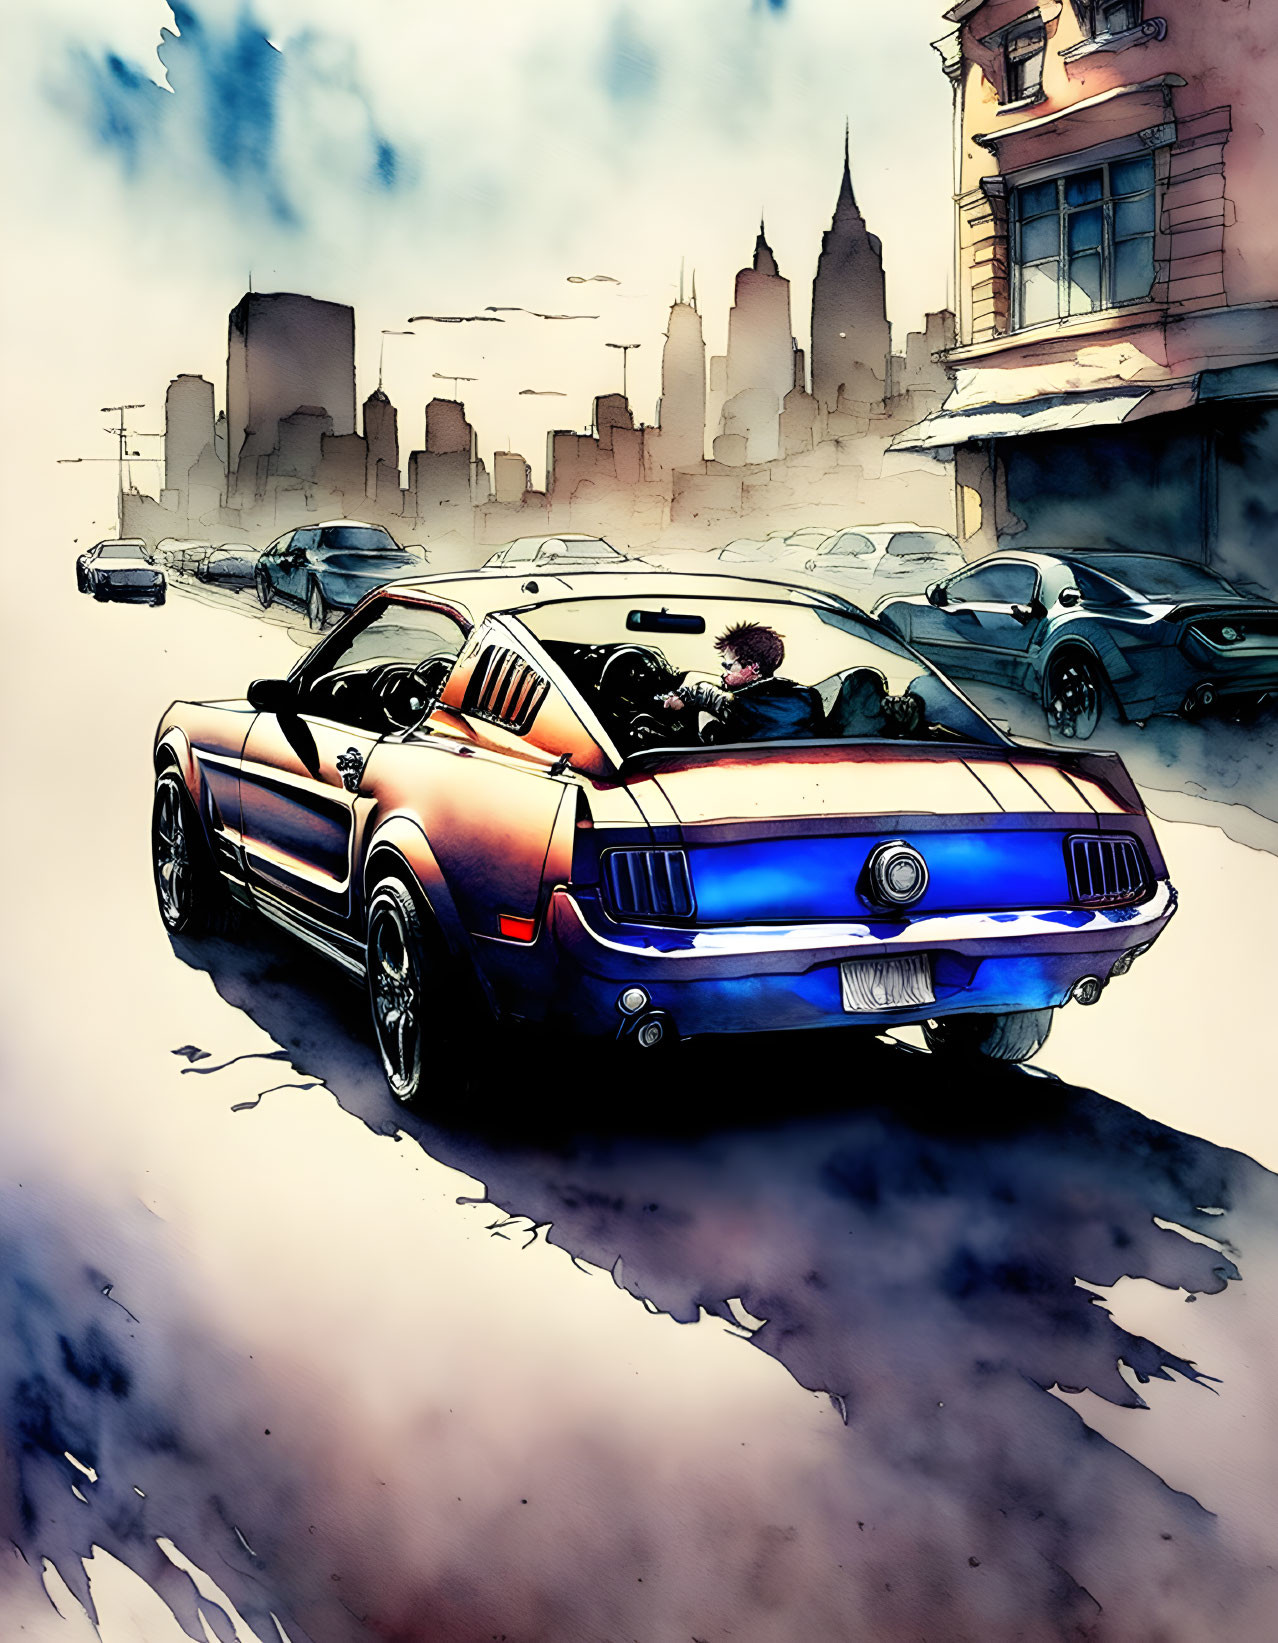 Colorful Watercolor Illustration of Classic Mustang Convertible in Urban Setting